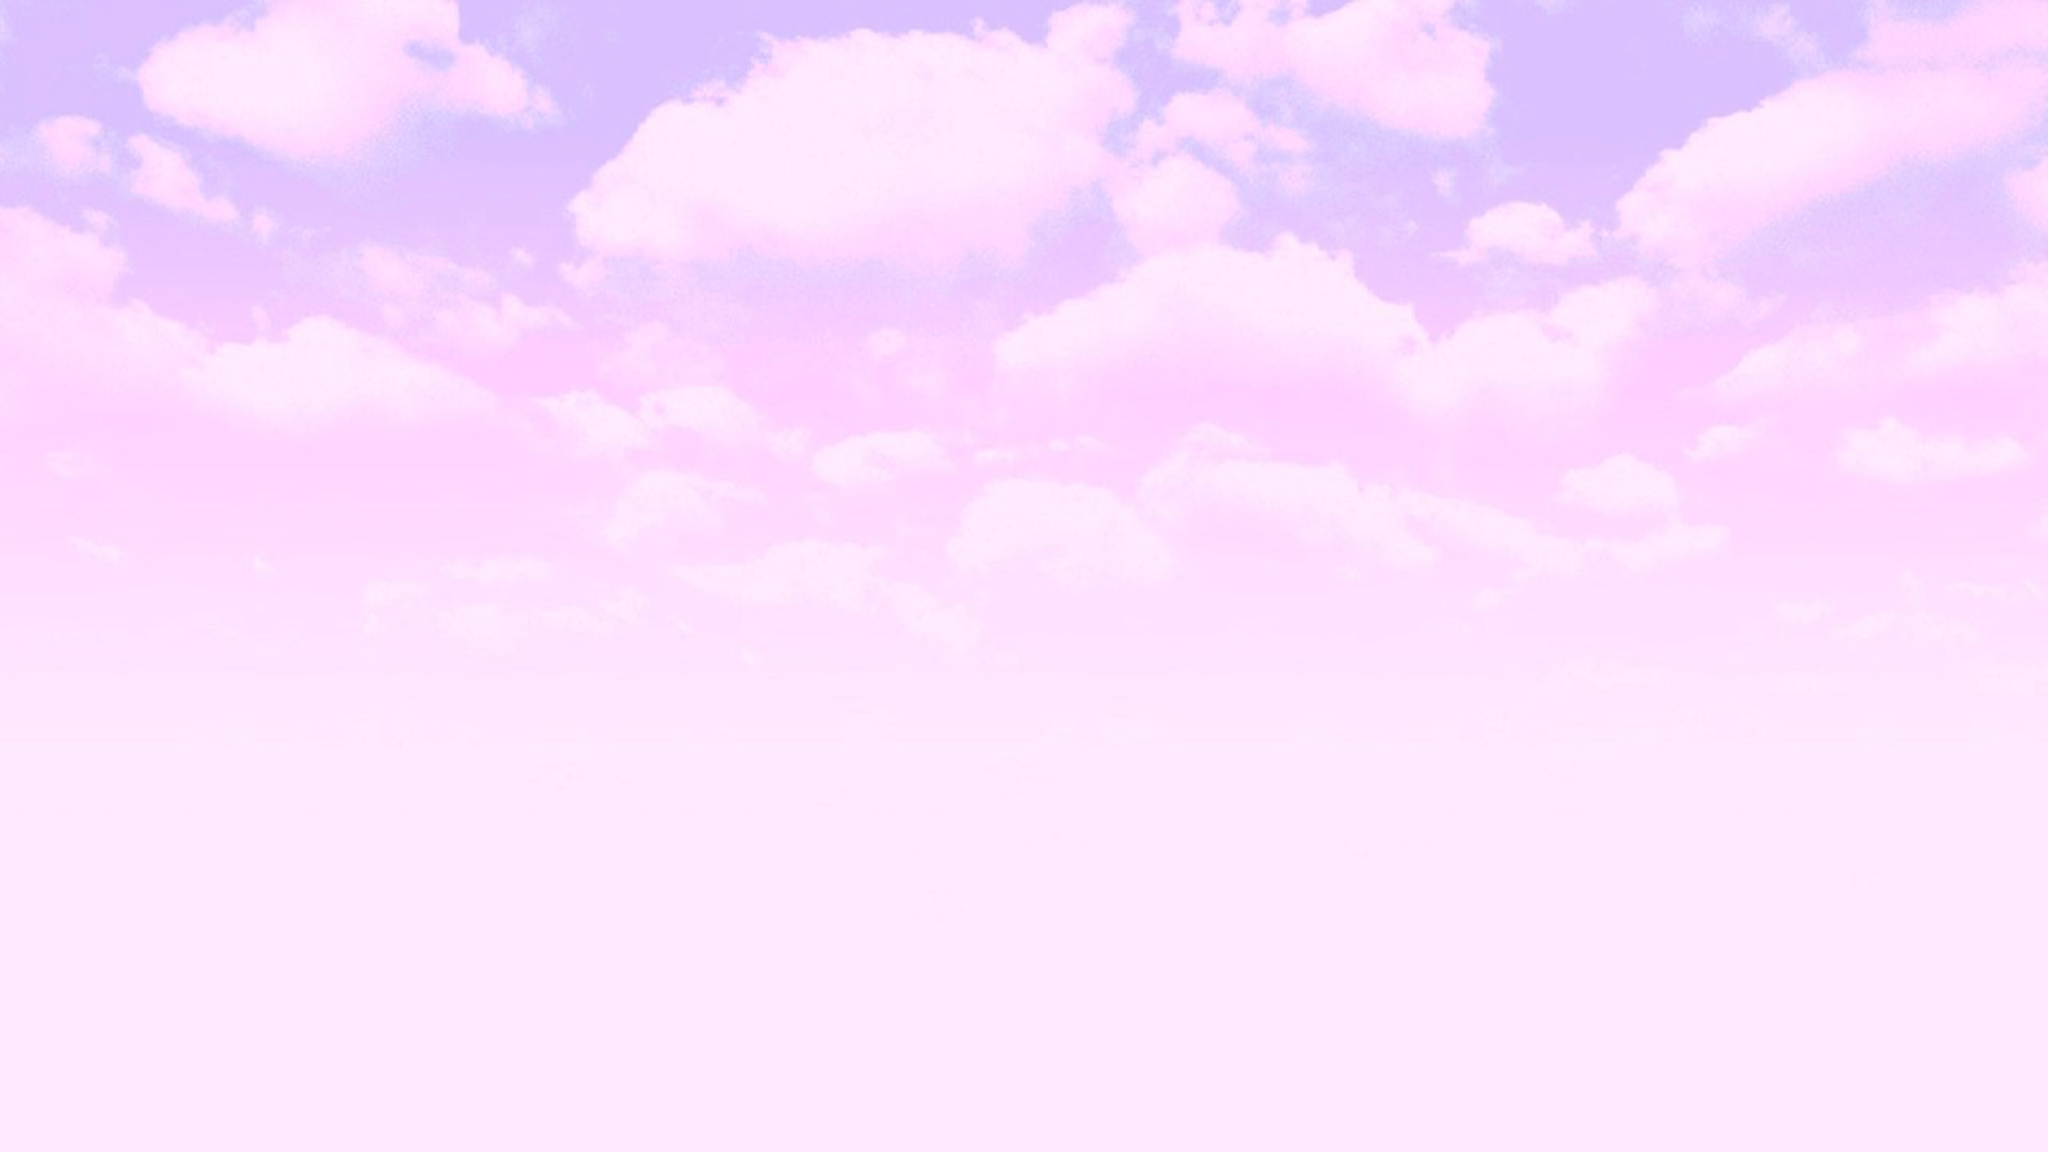 Pretty Pastel Wallpapers - Top Free Pretty Pastel Backgrounds